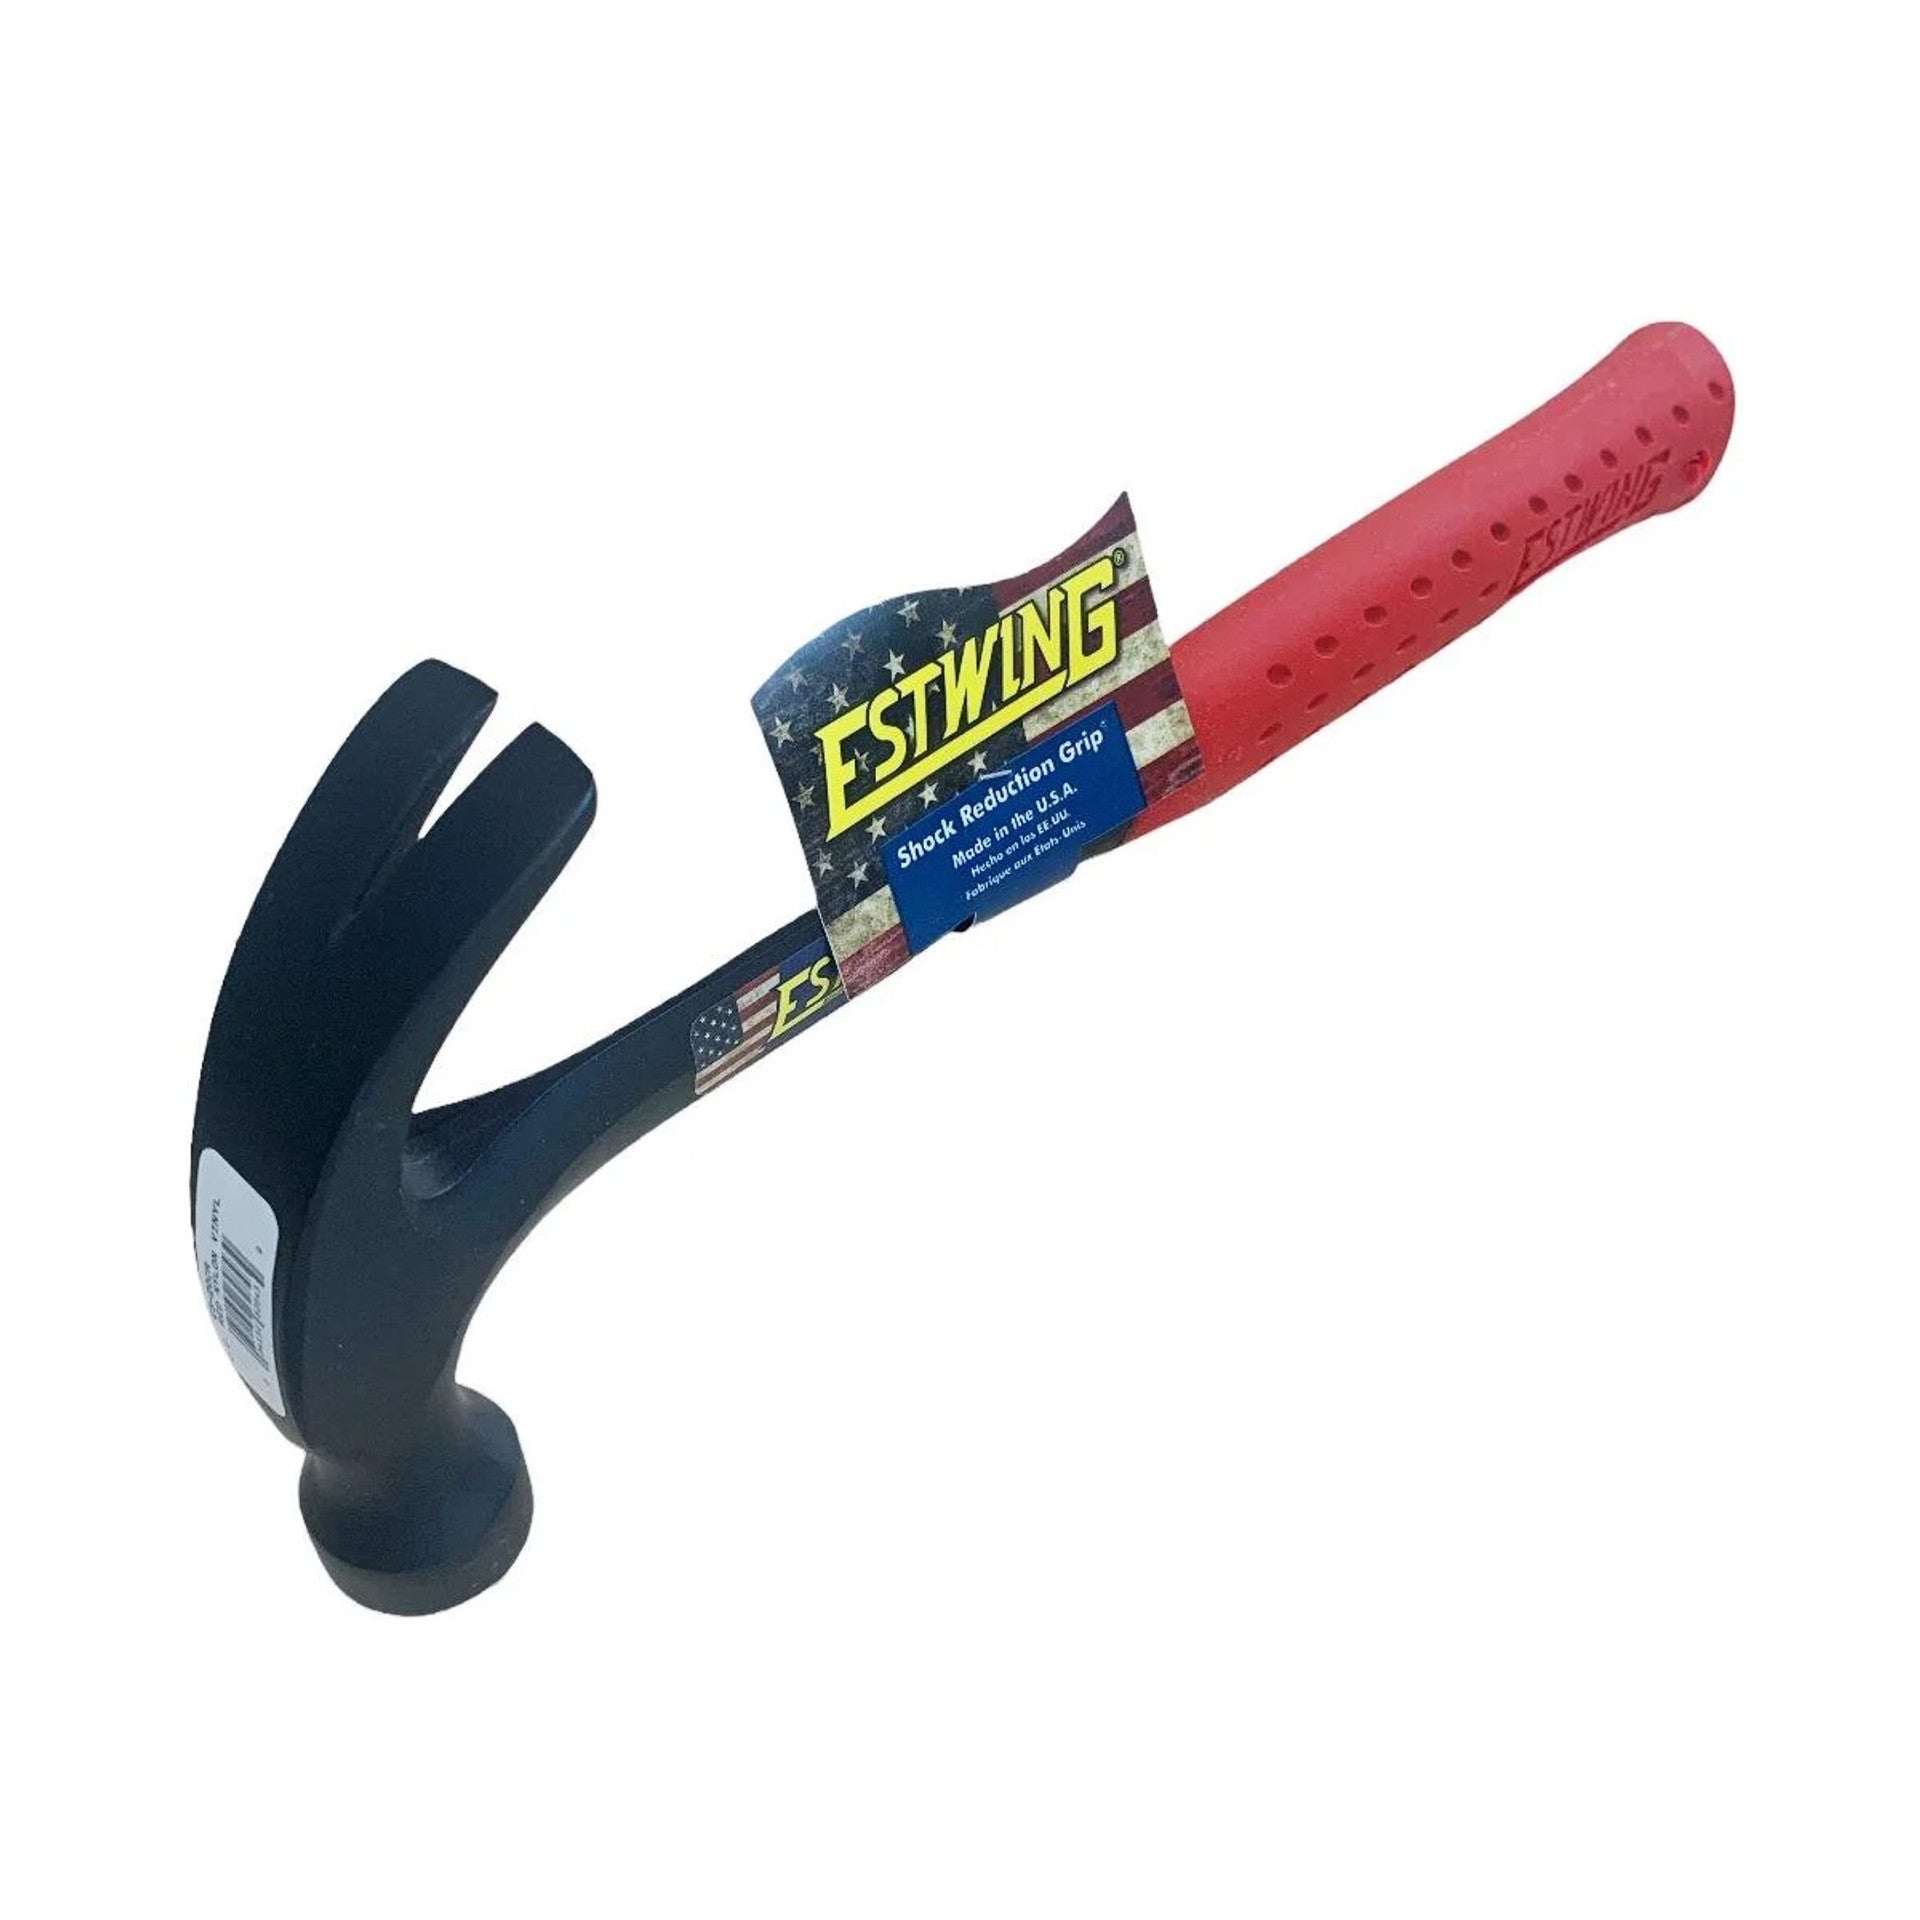 Estwing 20oz Curved Claw Hammer 0.56kg E320CRED